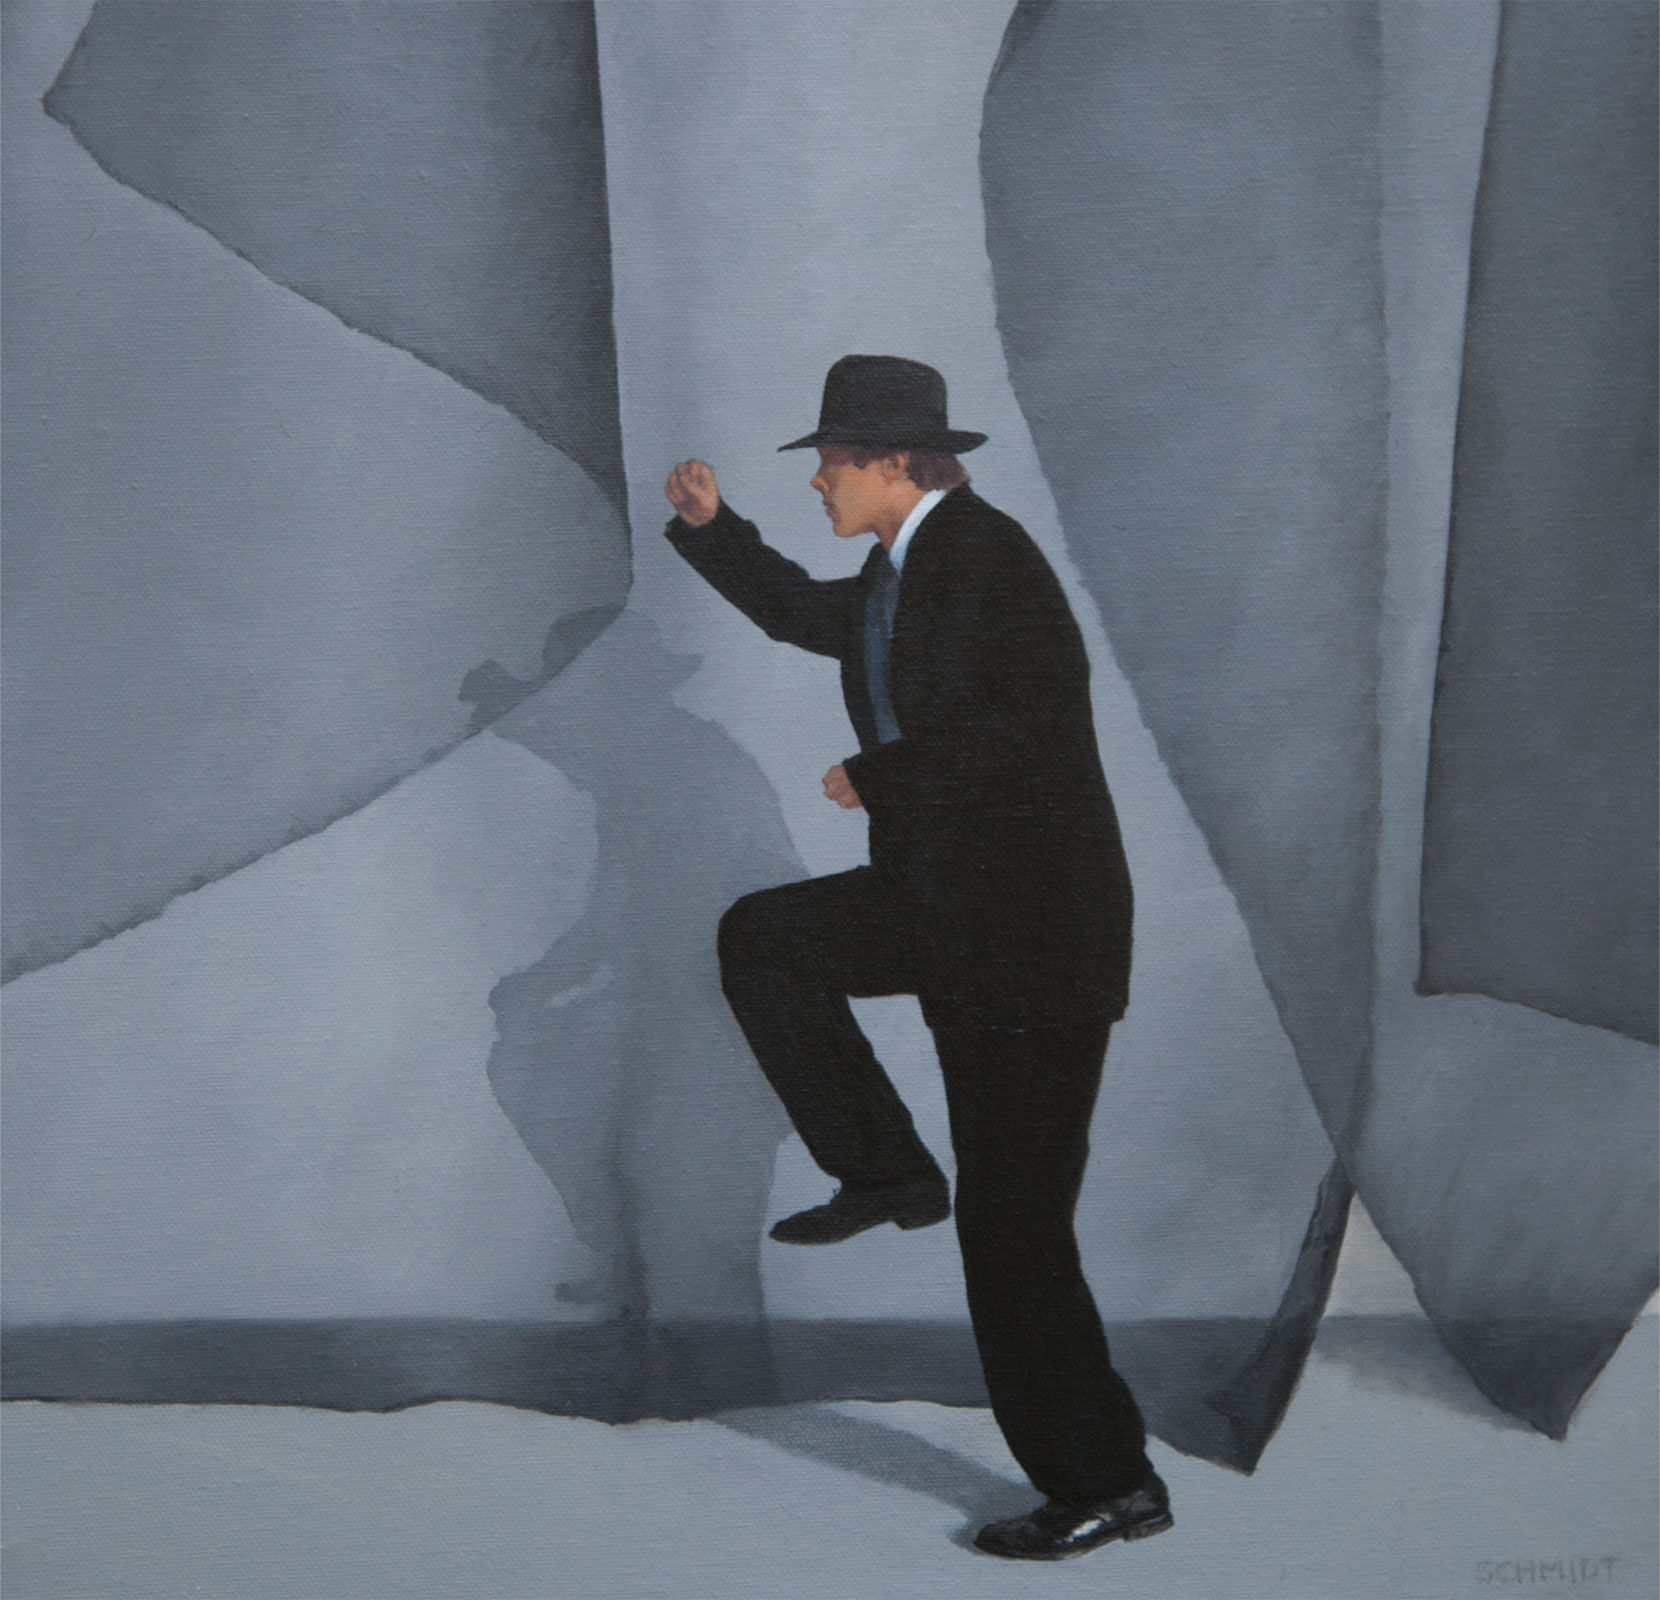 Man running wearing fedora hat and suit